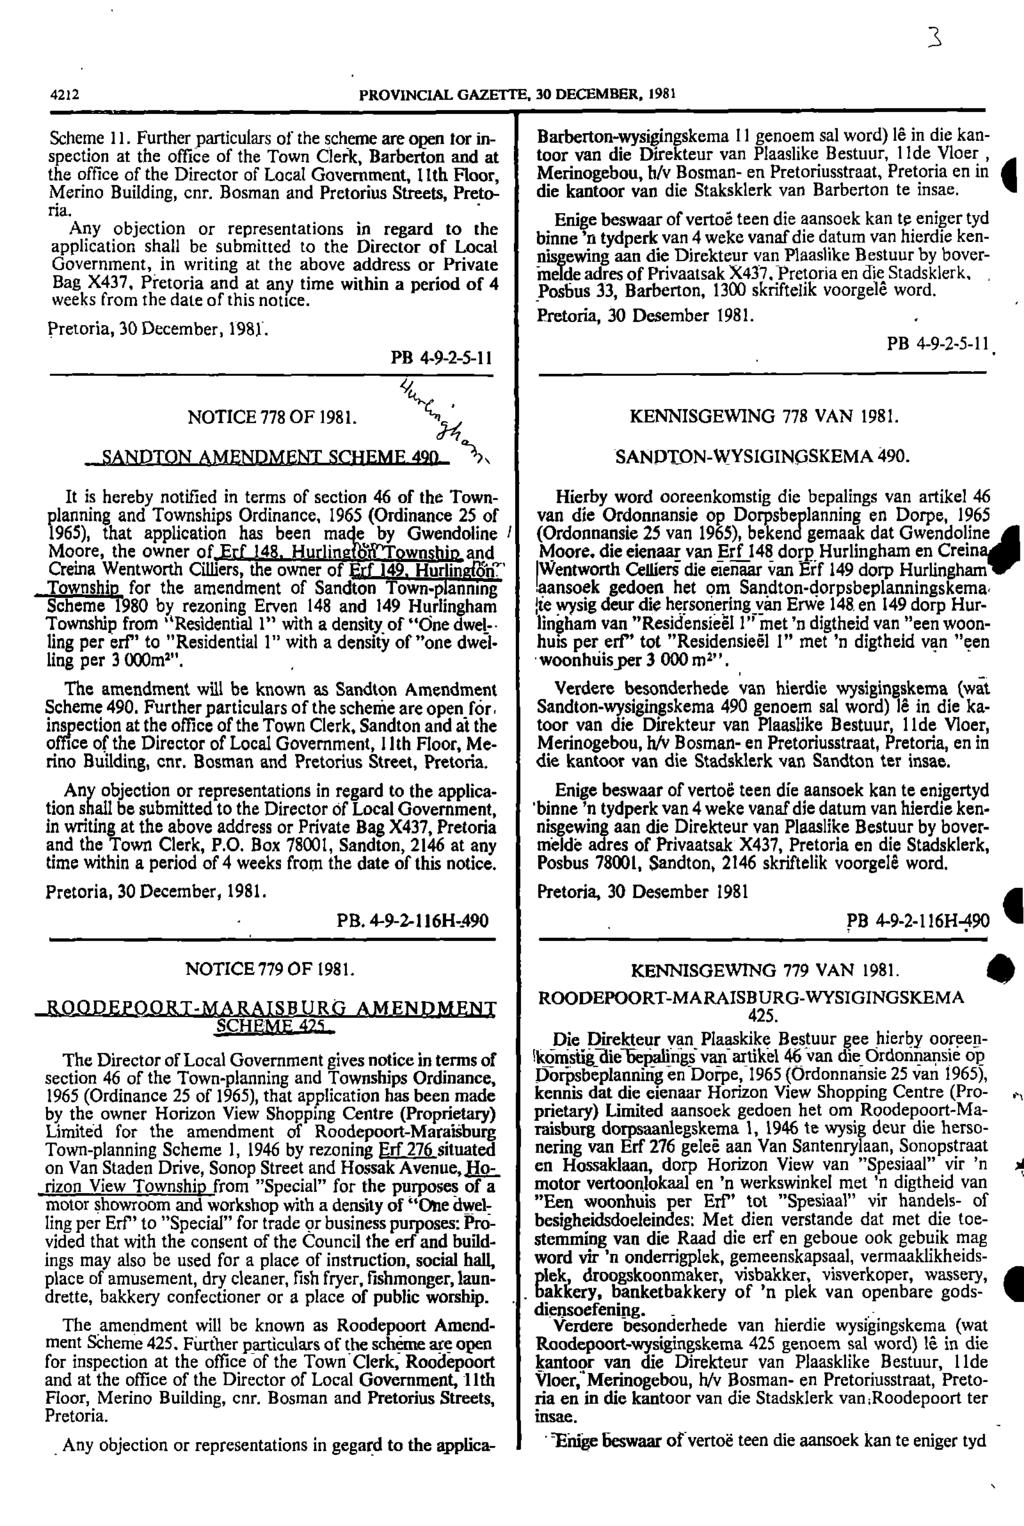 3 4212 PROVINCIAL GAZE I Ib, 30 DECEMBER, 1981 Scheme 11 Further particulars of the scheme are open for in Barbertonwysigingskema I 1 genoem sal word) le in die kan spection at the office of the Town